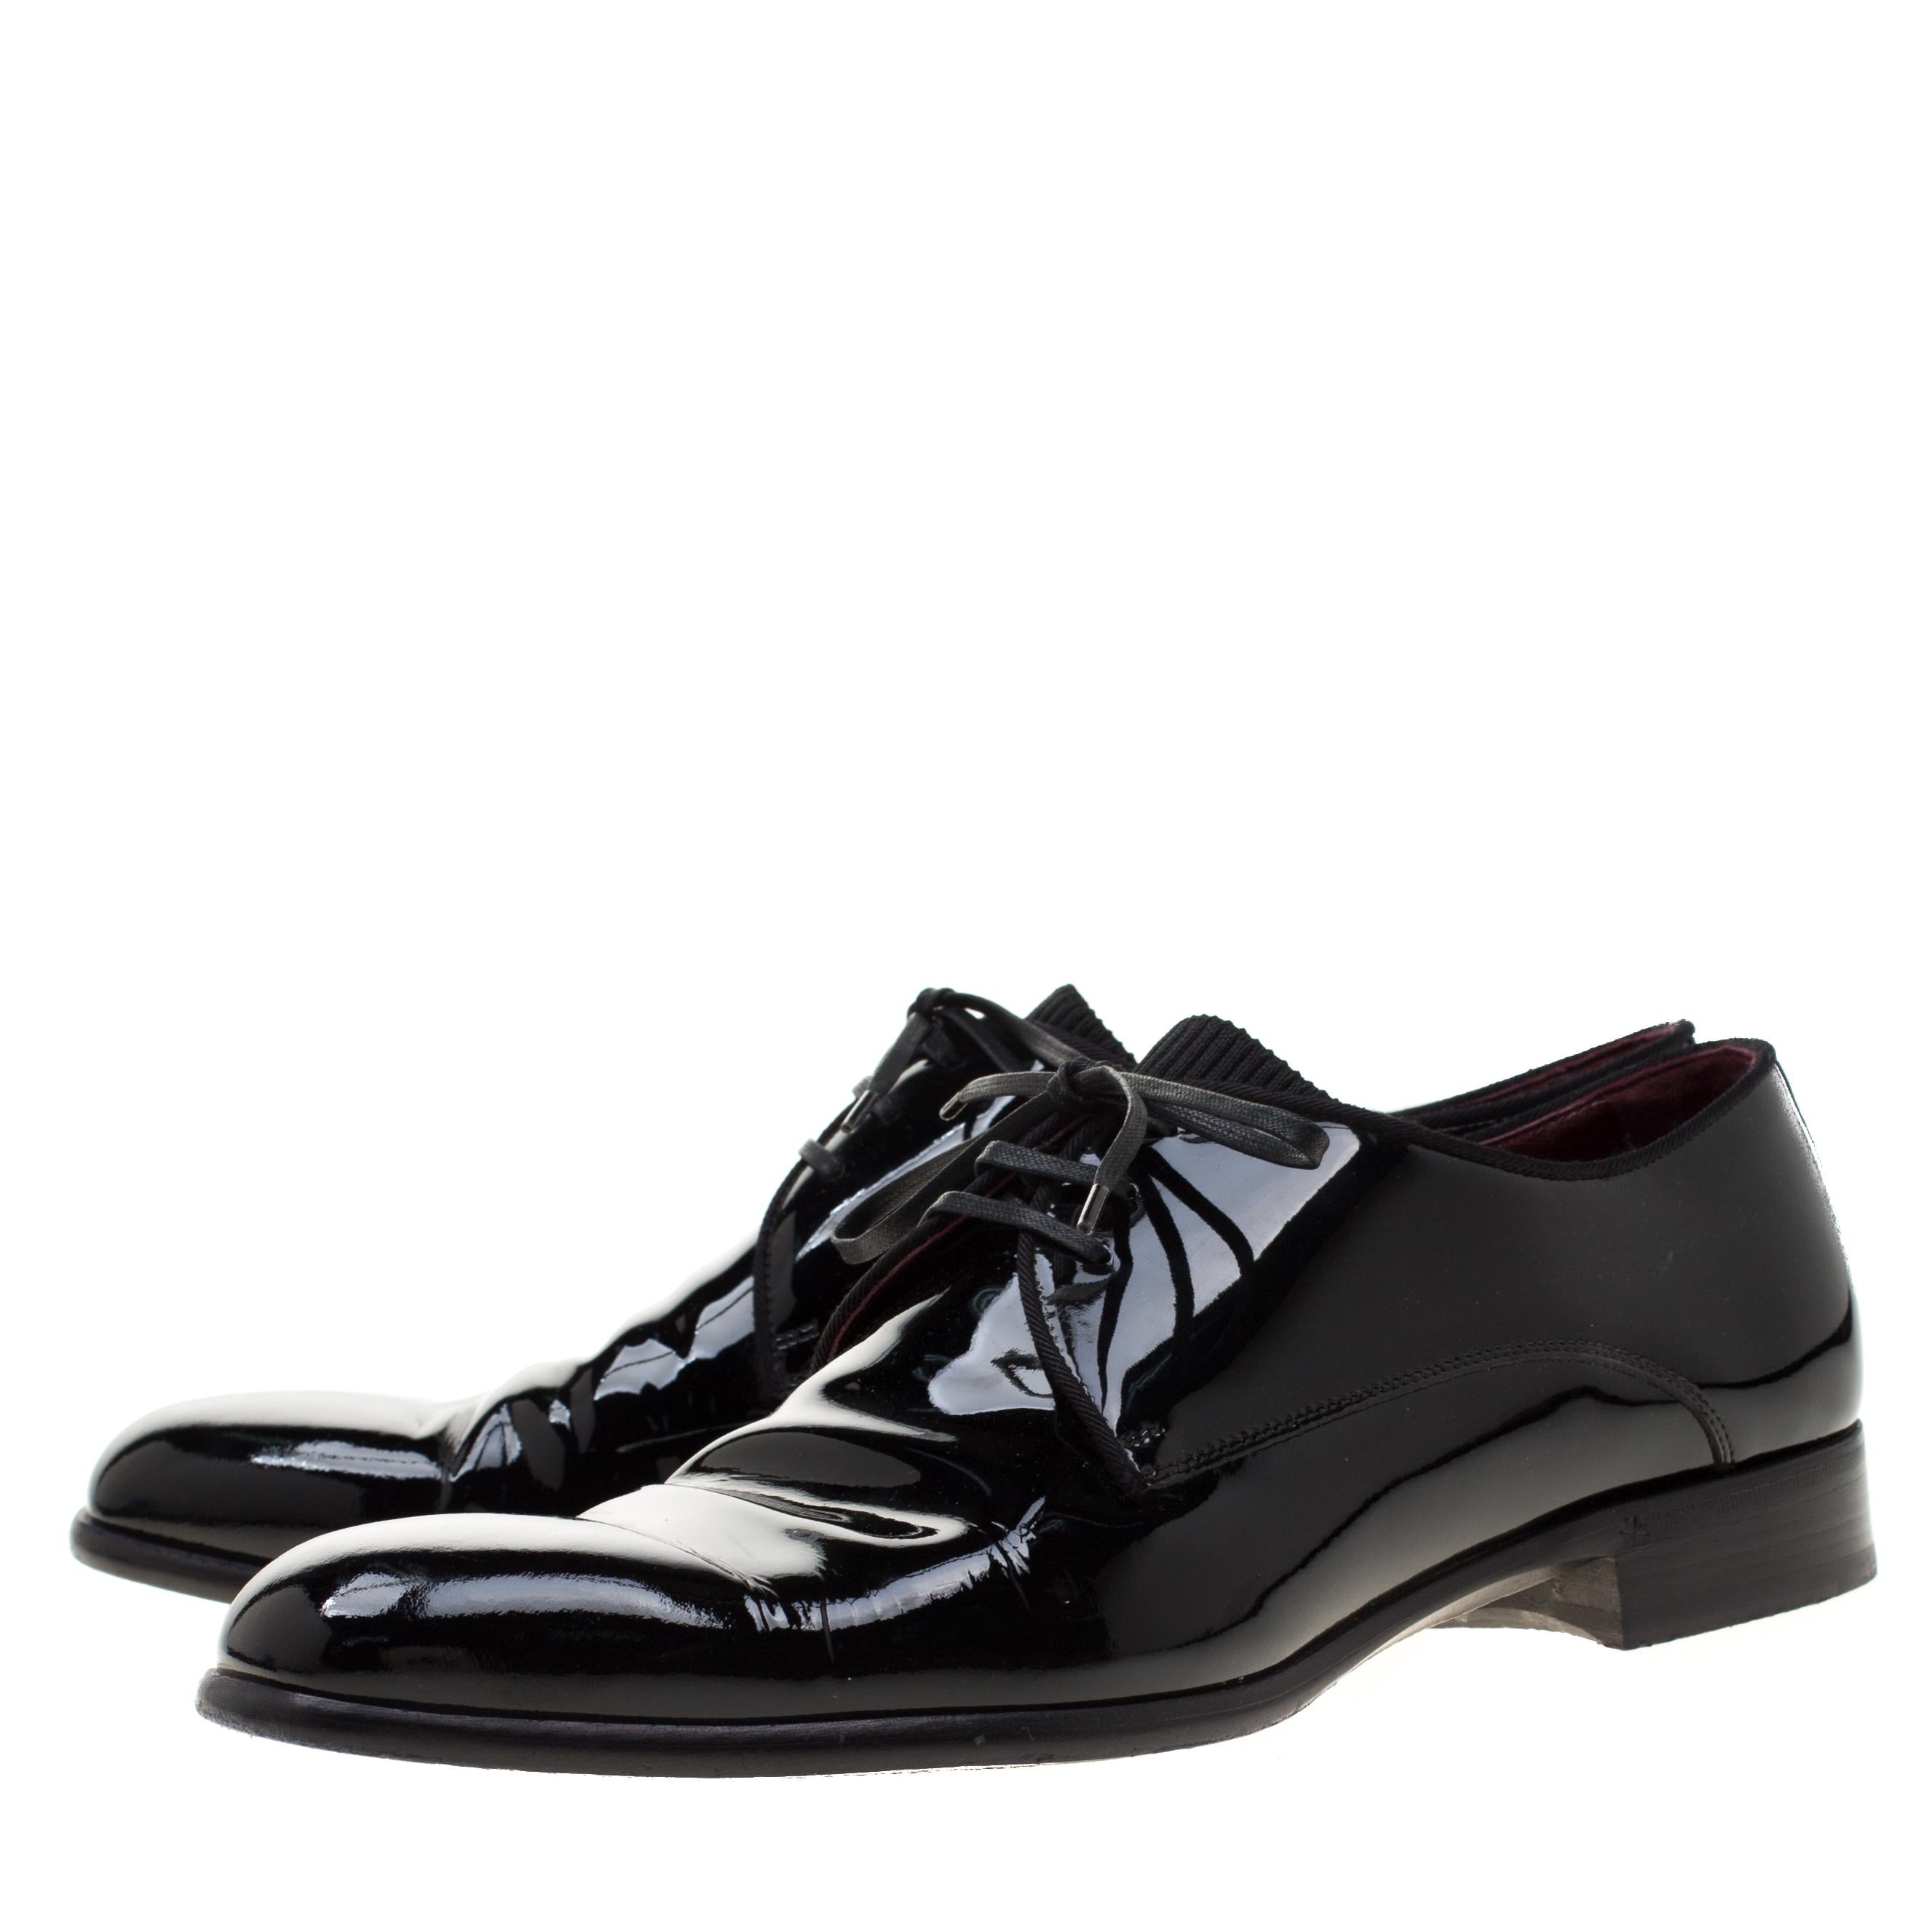 Dolce and Gabbana Black Patent Leather Derby Oxford Shoes Size 43 1